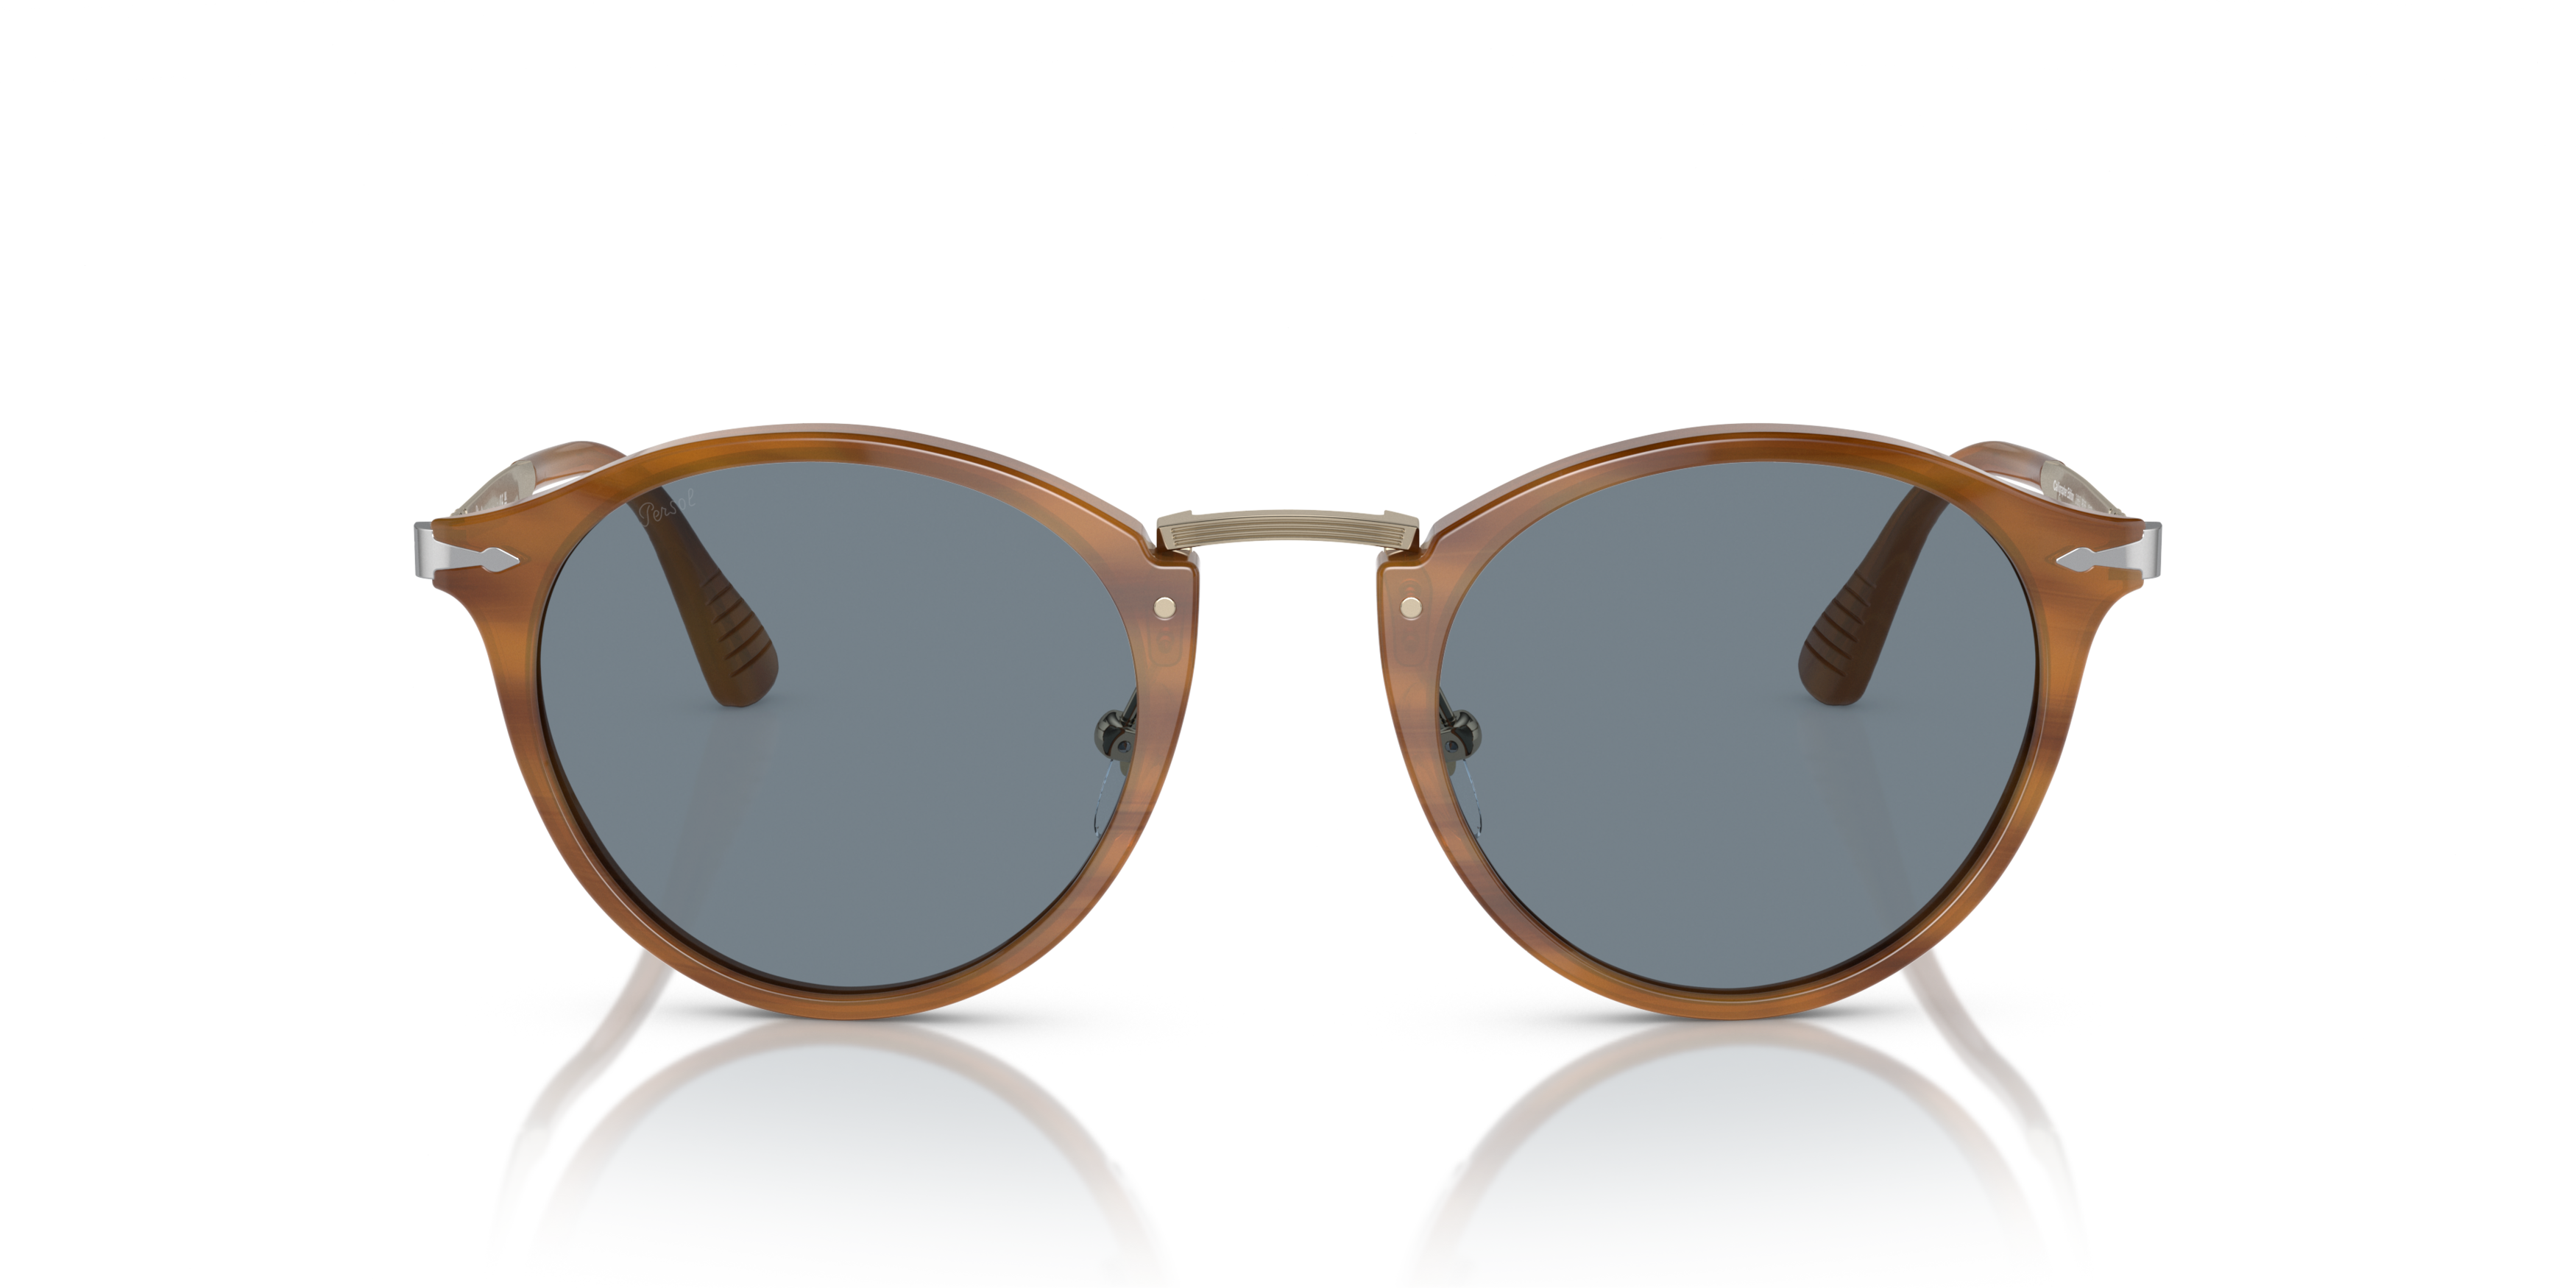 [products.image.front] PERSOL PO3166S 960/56